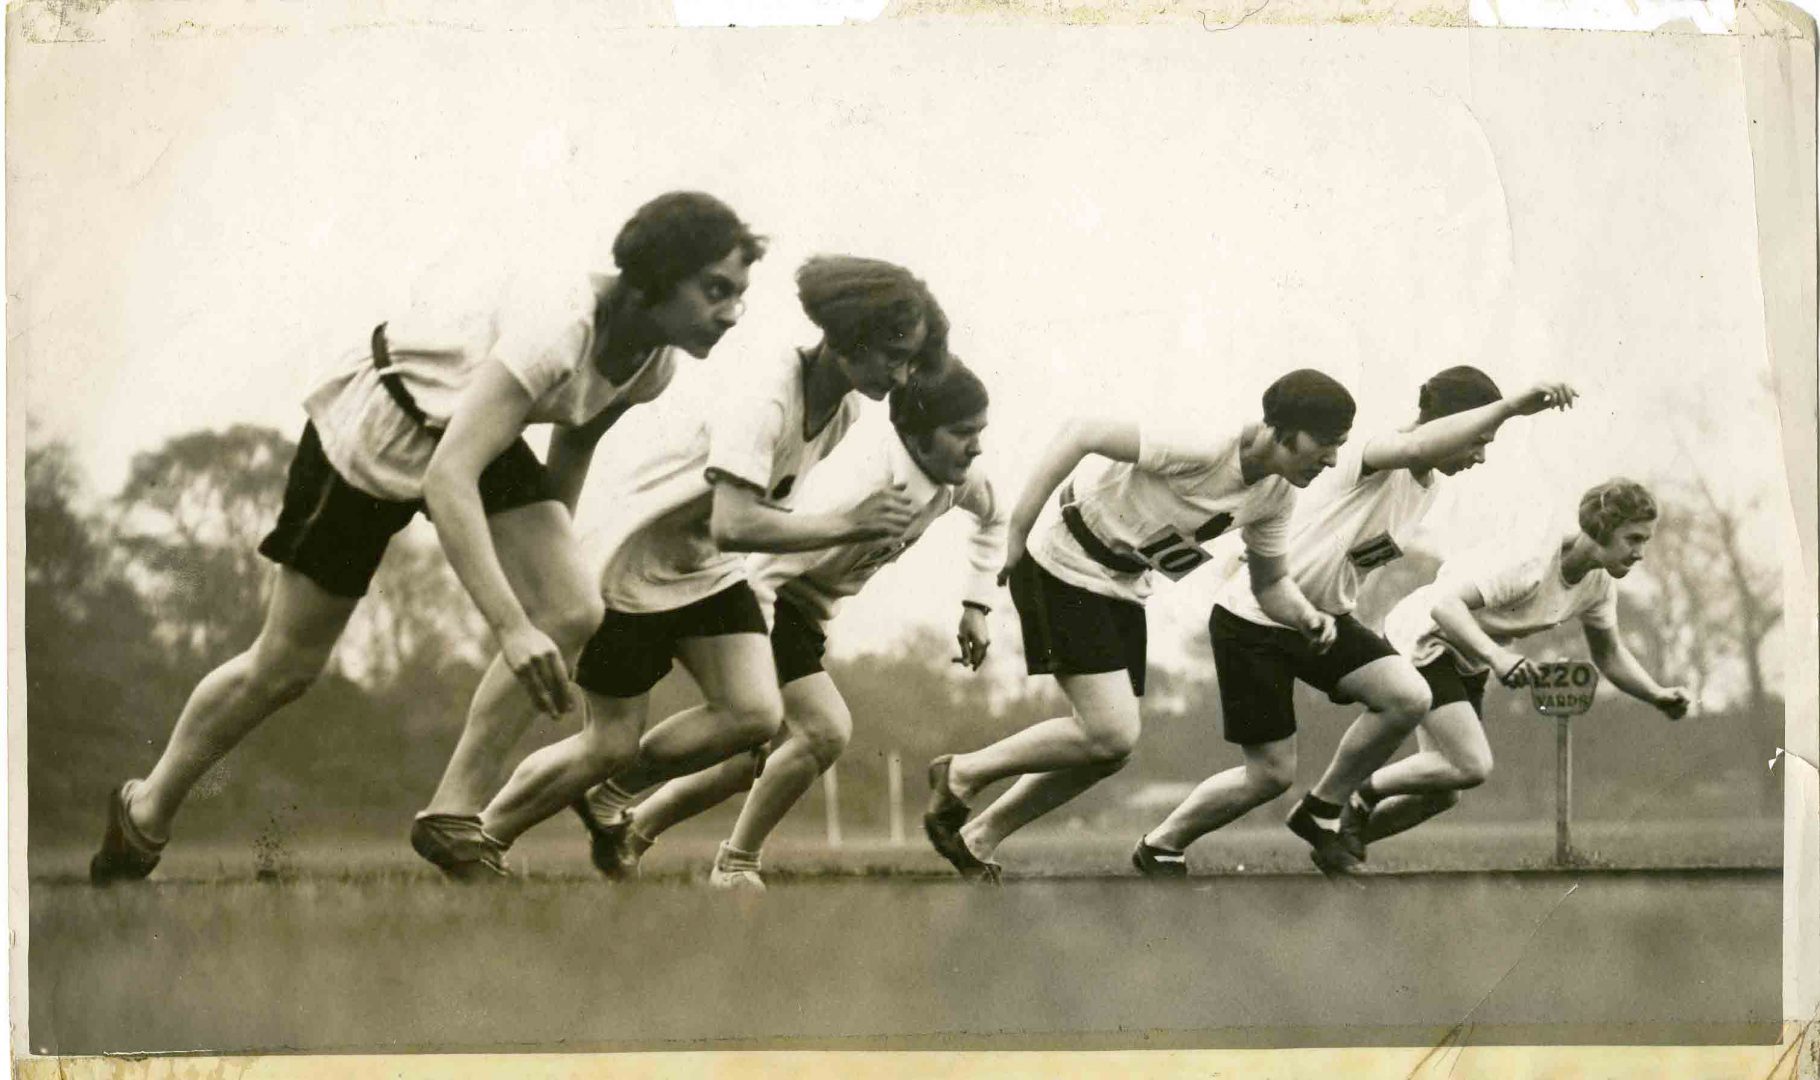 Dymanic black and white photograph showing women starting a running race in the 1930s